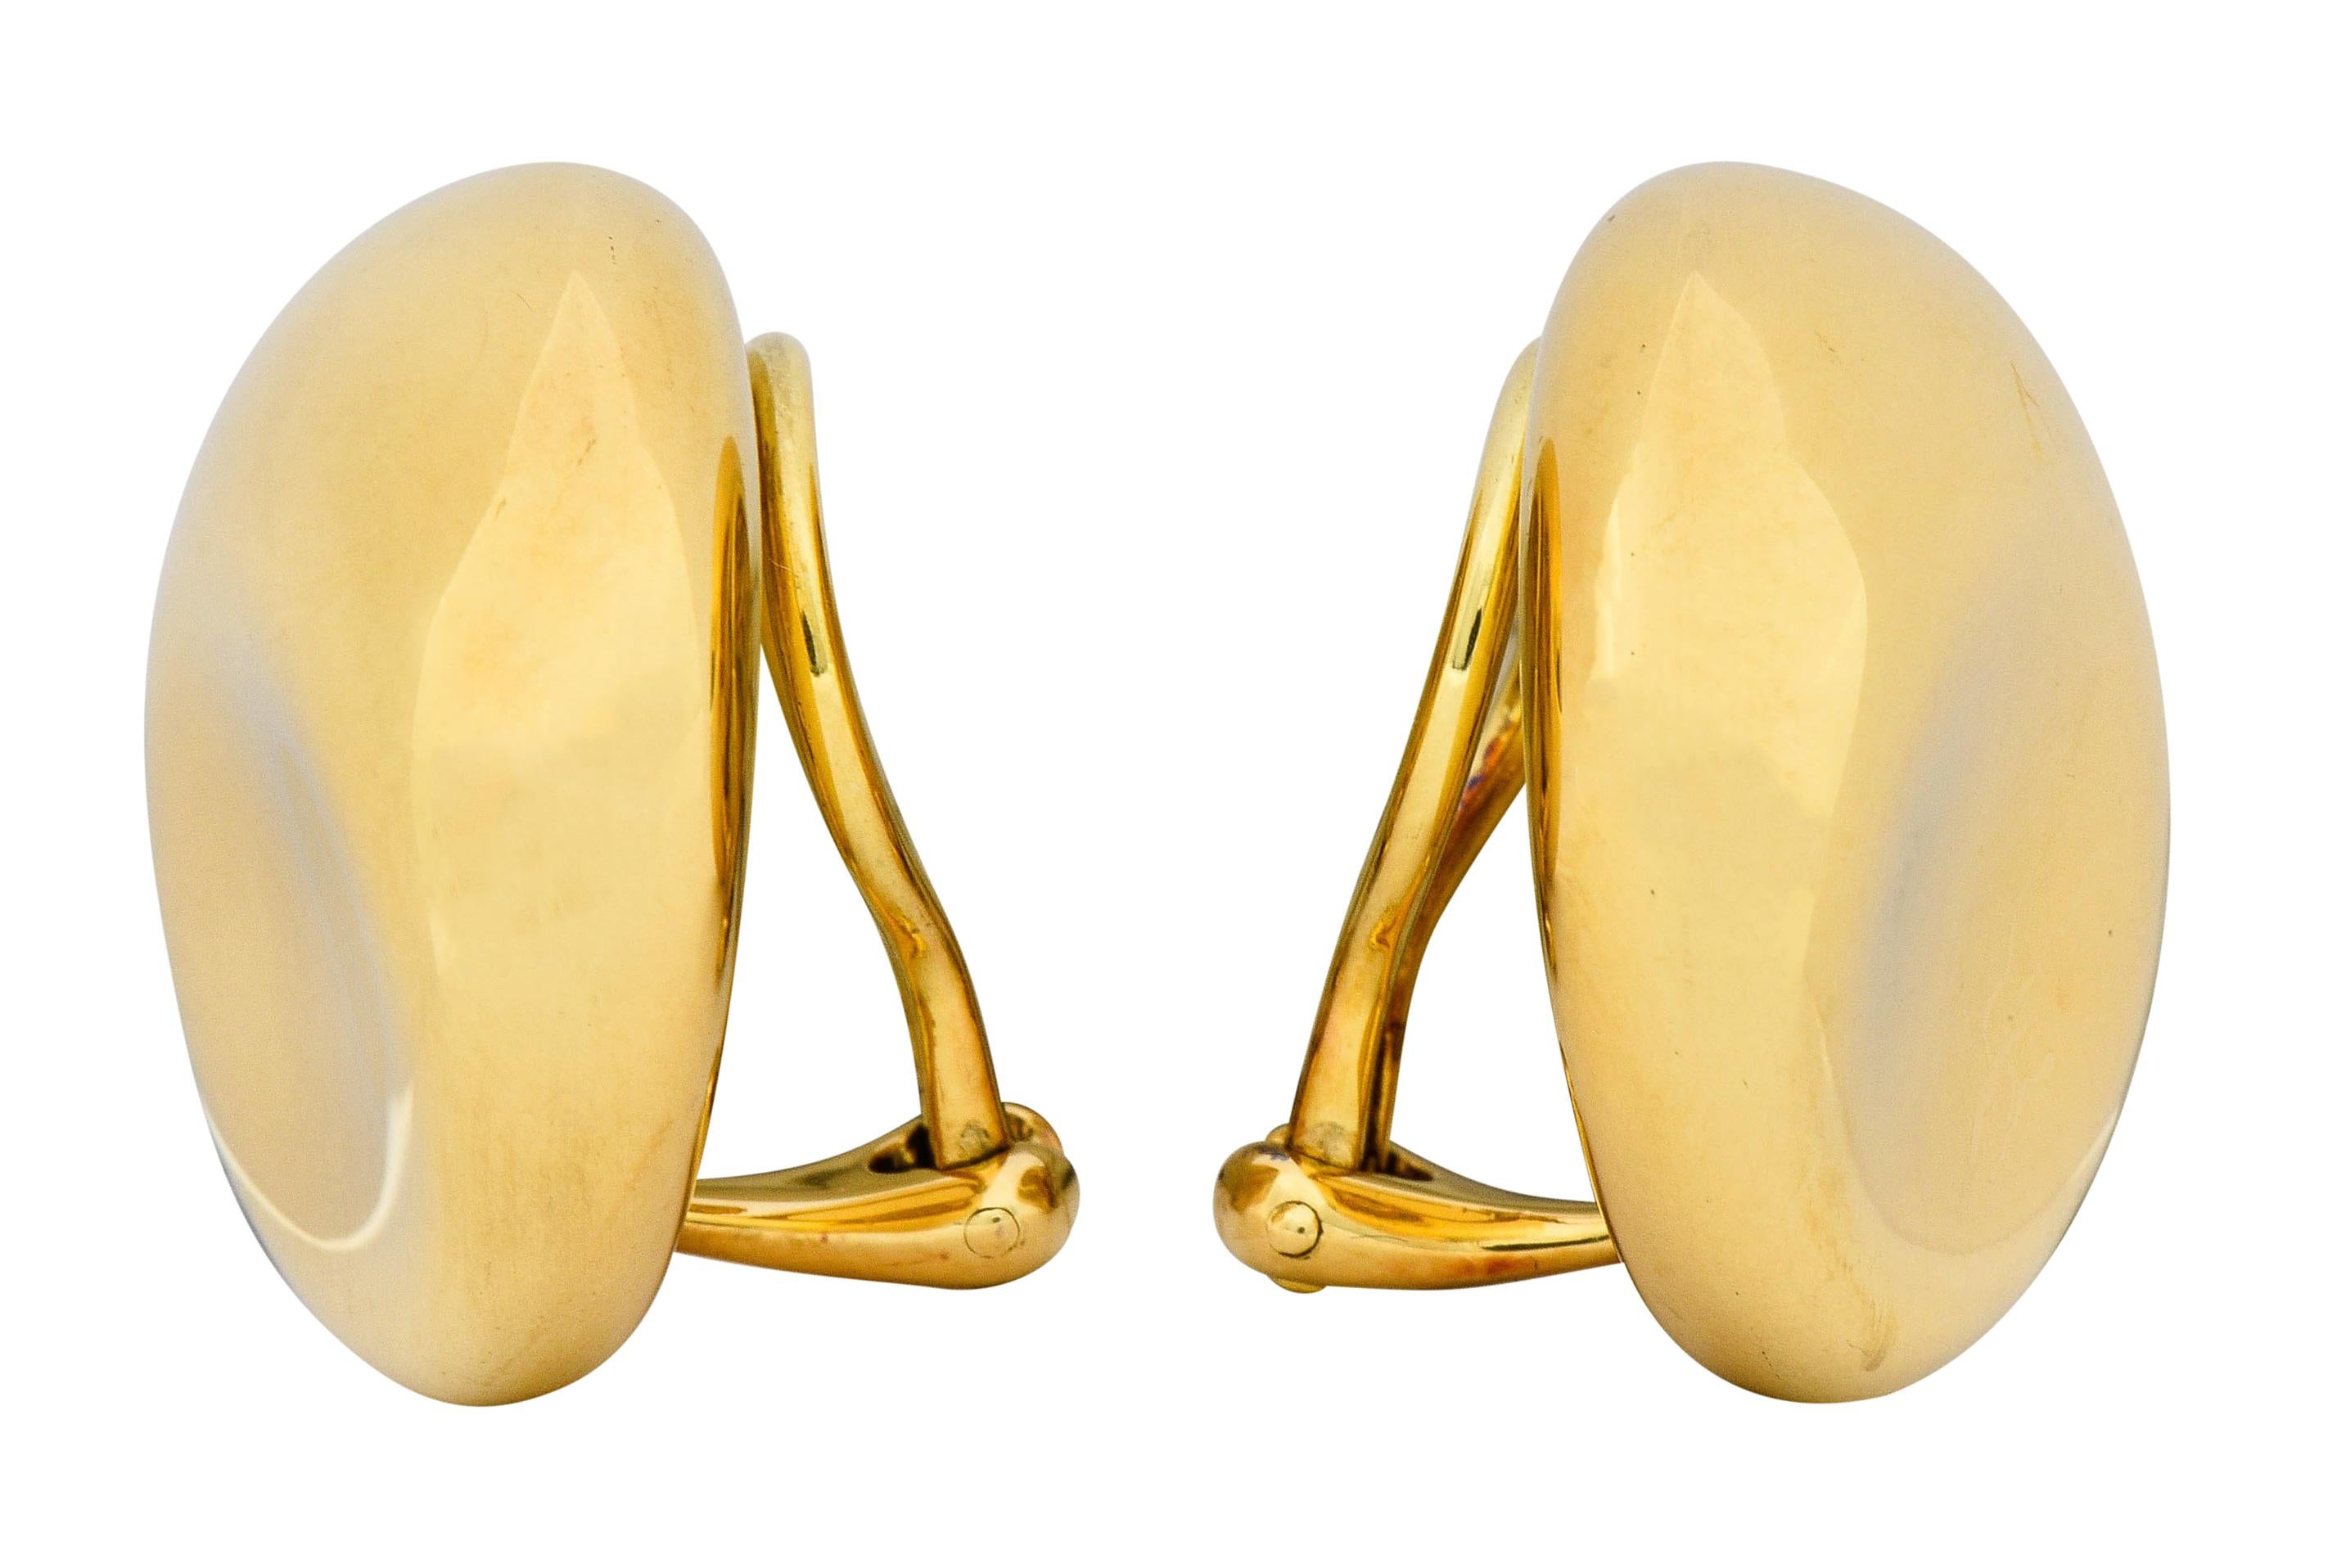 Ear-clips are designed as circular forms with a slightly concave indentation

With a high polished finish

Completed by hinged omega backs

Fully signed Elsa Peretti Tiffany & Co. Spain

Stamped 750 for 18 karat gold

Circa: 1980s

Measures: 7/8 x 1